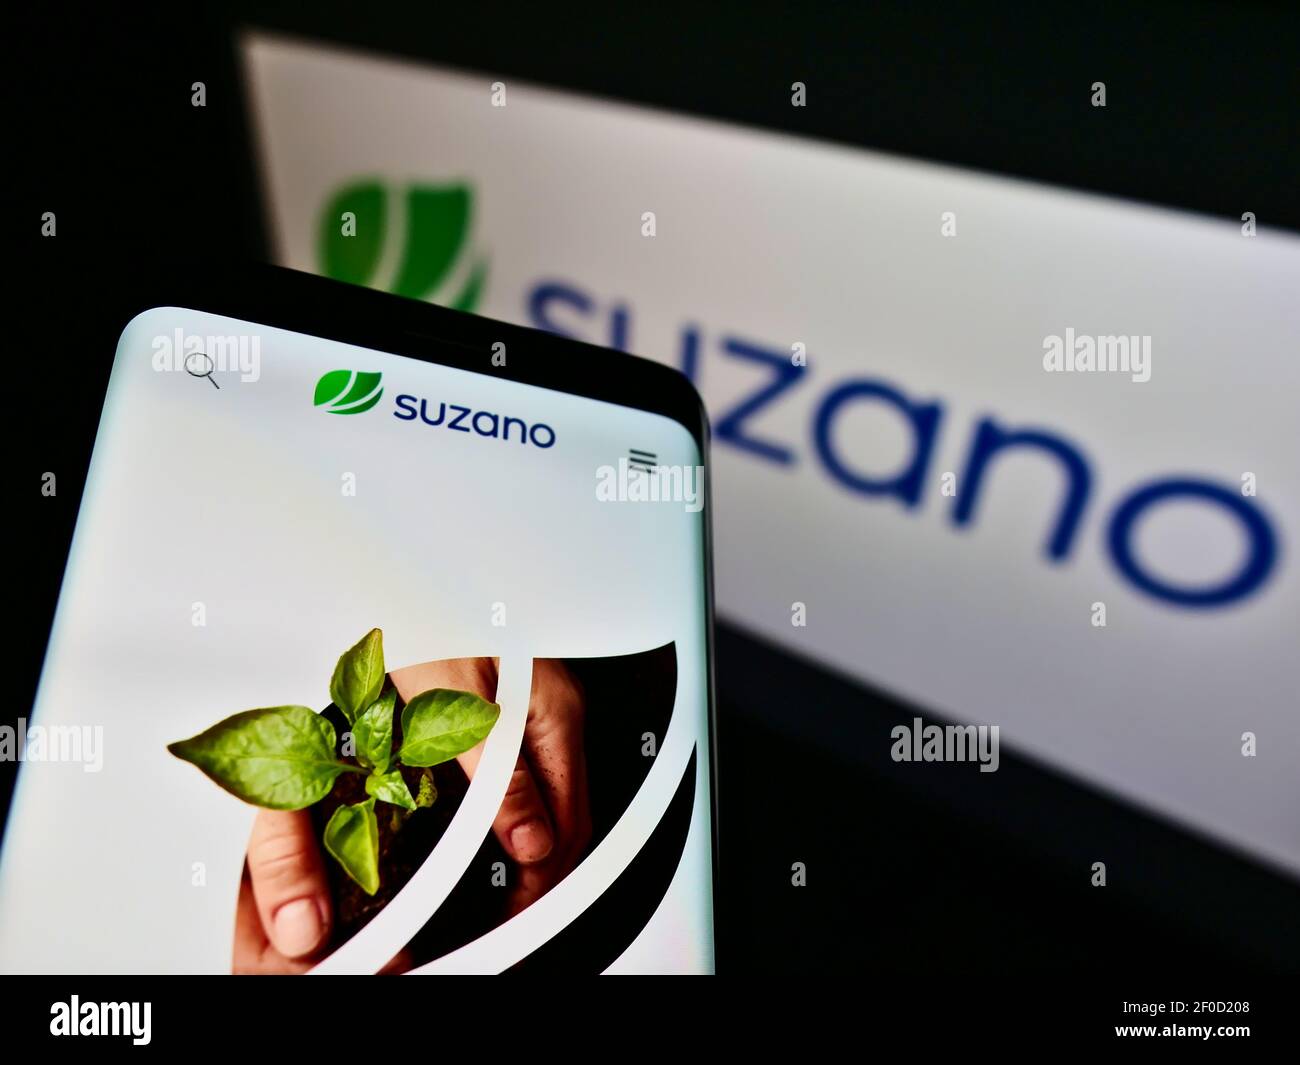 Smartphone with website of Brazilian pulp and paper manufacturer Suzano S.A. on screen in front of company logo. Focus on center of phone display. Stock Photo